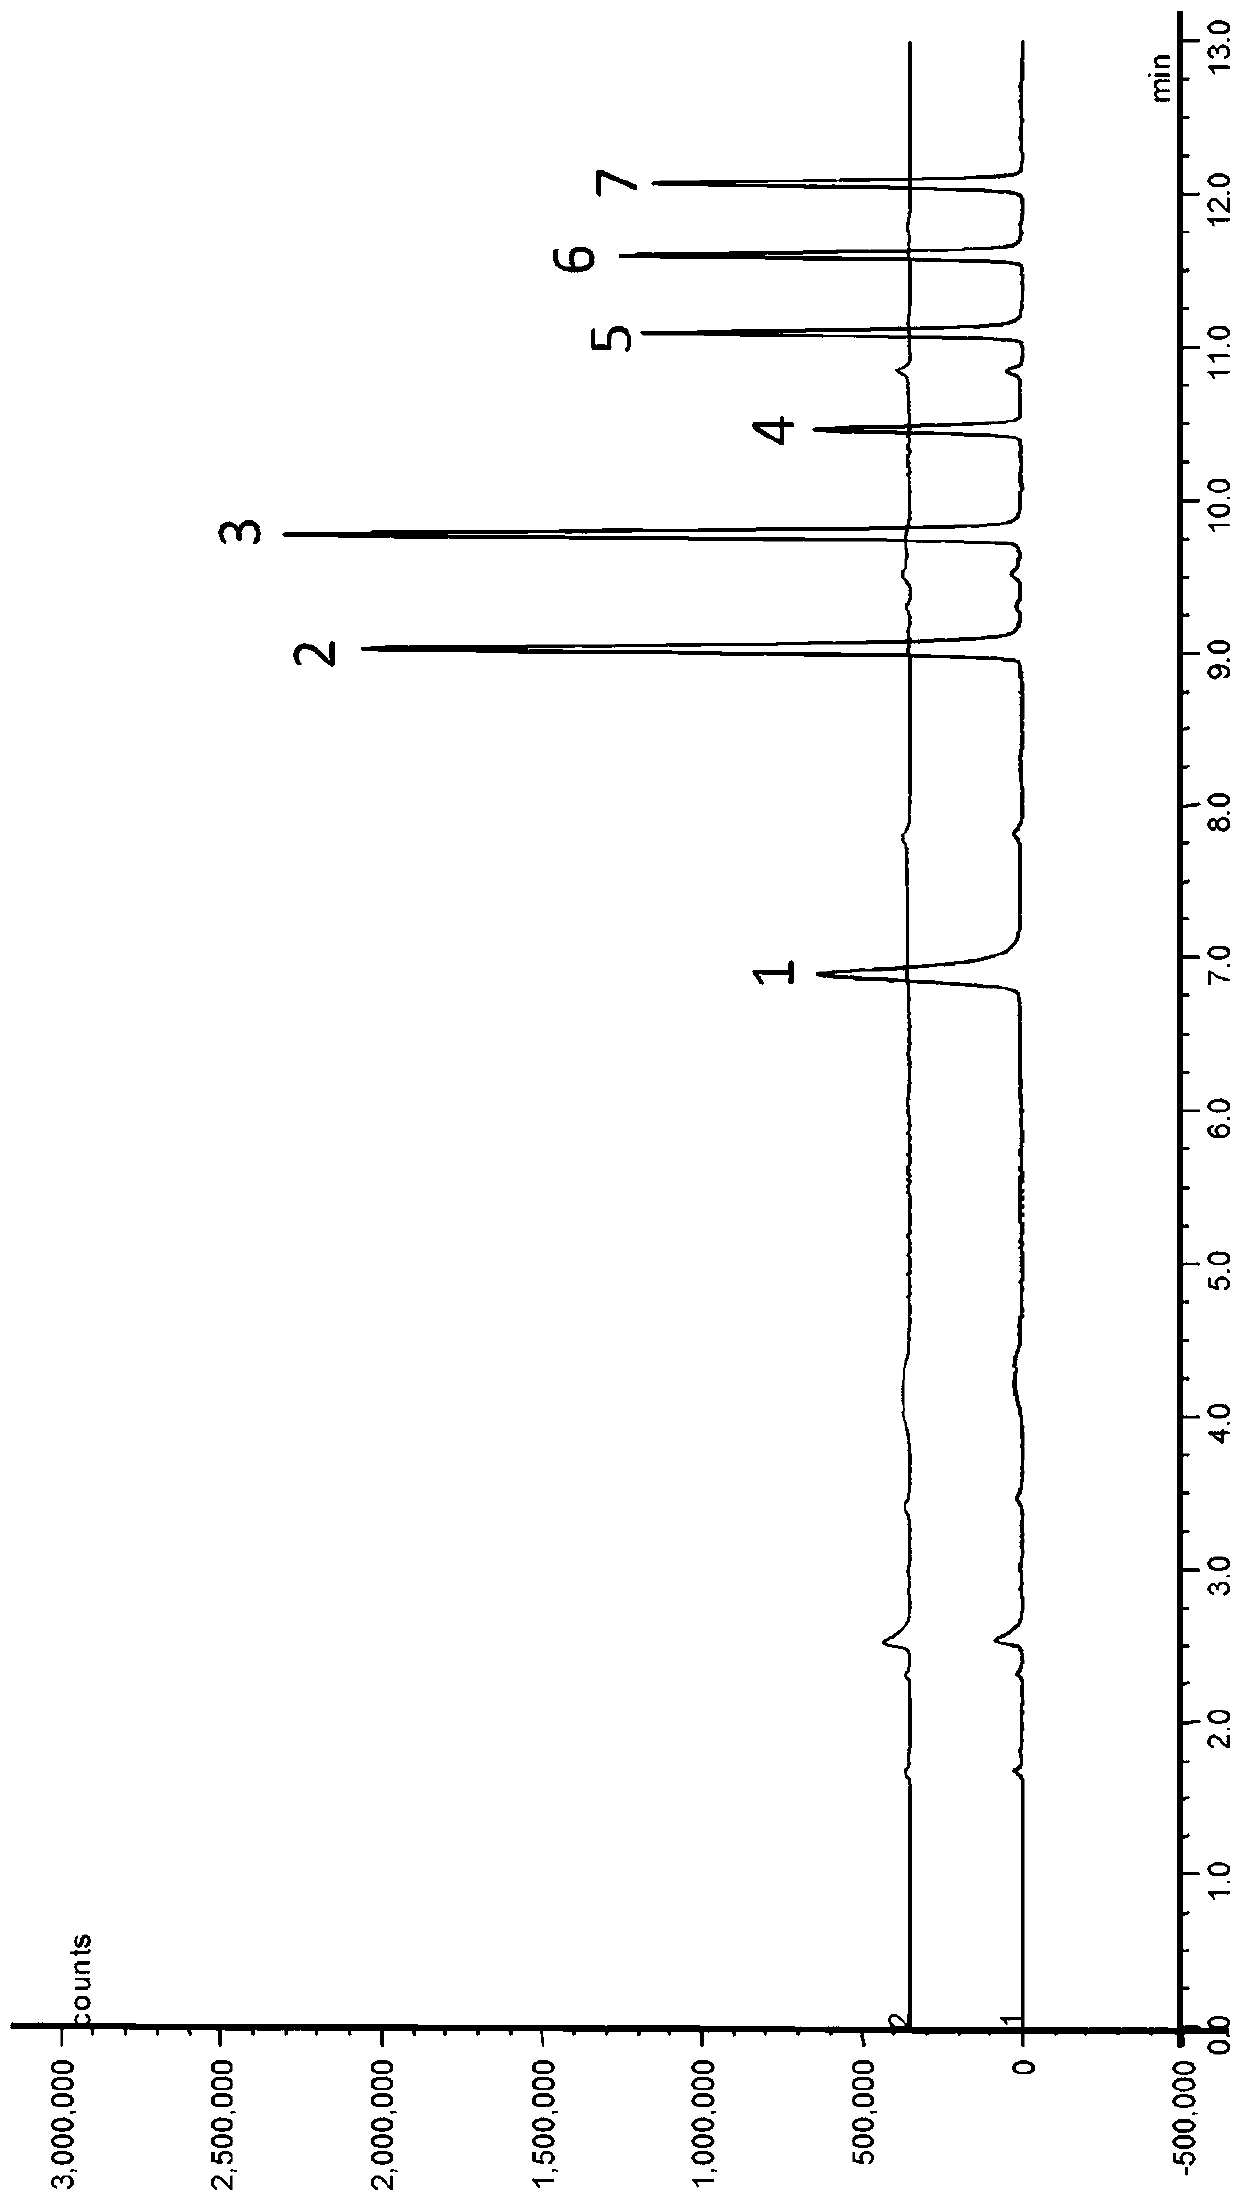 Method for determination of trace organic amine in atmospheric particulate matters